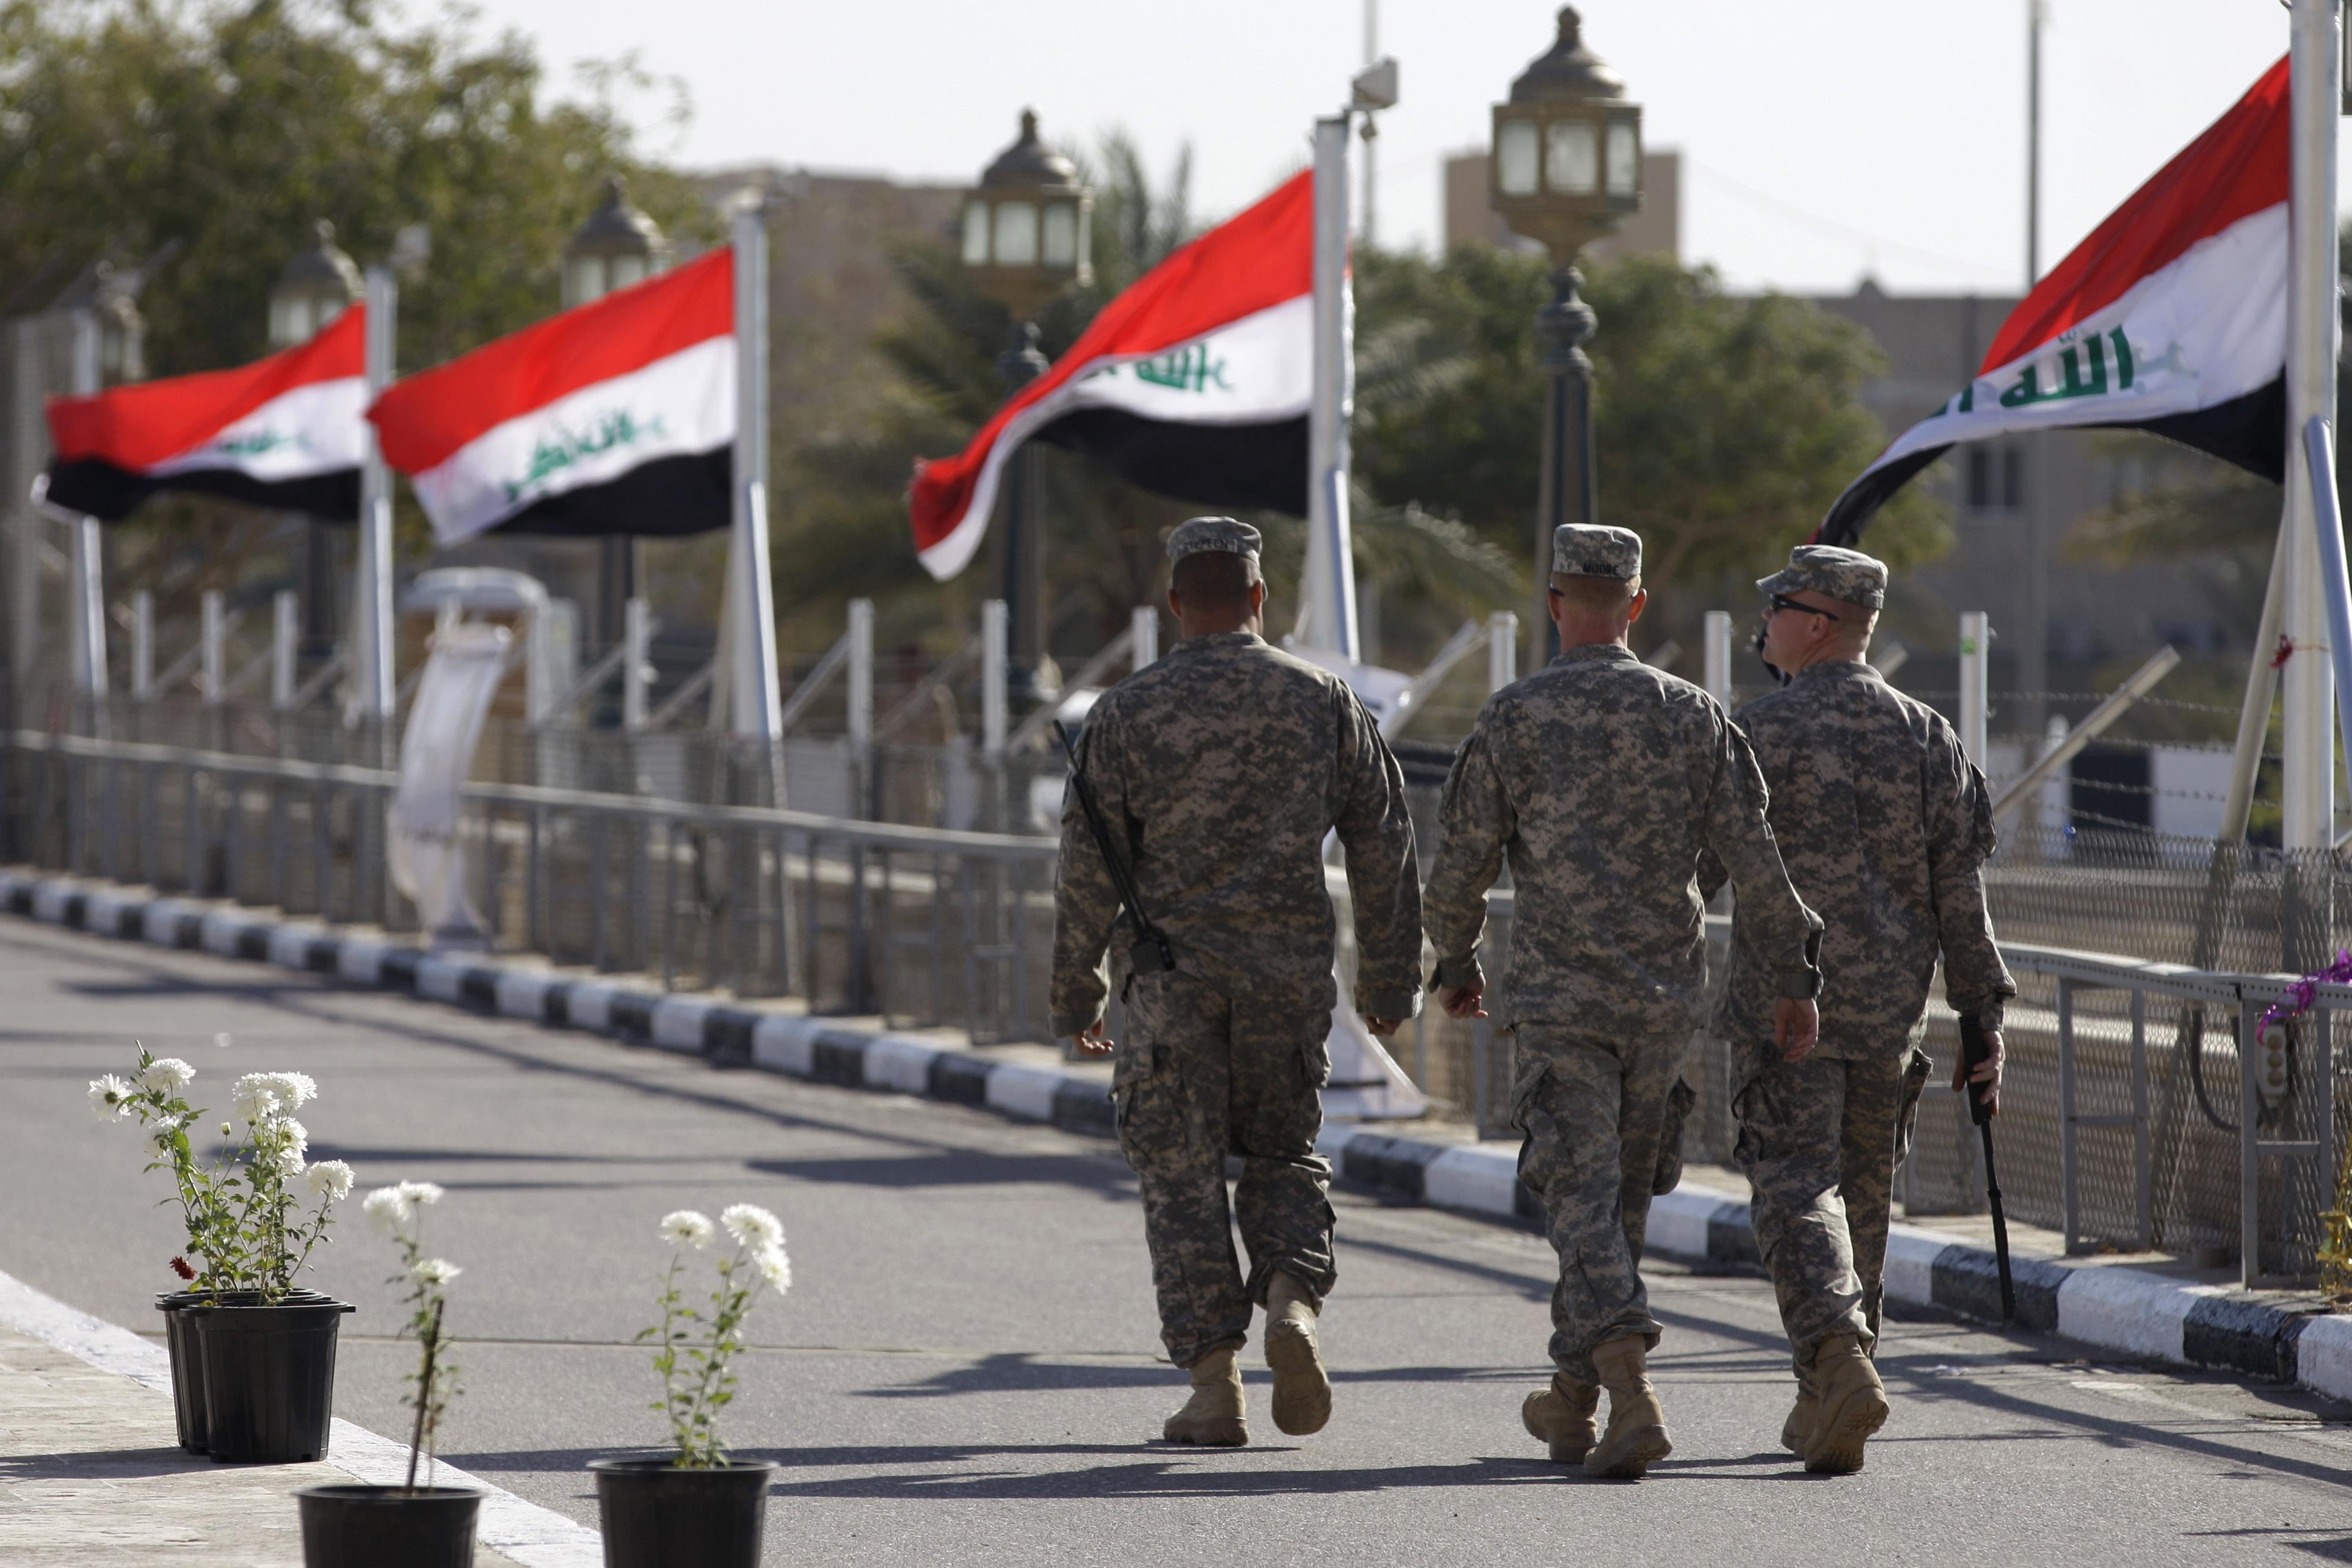 Iraqi flags fly in the wind as US soldiers leave Al-Fao palace at Camp Victory, one of the last US bases Iraq, after a special ceremony in Baghdad on December 1, 2011. The United States handed over to Iraqi control the sprawling Victory Base Complex near Baghdad, the main base from which the US war in Iraq was run, a US military spokesman said on December 2, 2011.
AFP PHOTO/POOL/KHALID MOHAMMED (Photo credit should read KHALID MOHAMMED/AFP/Getty Images)